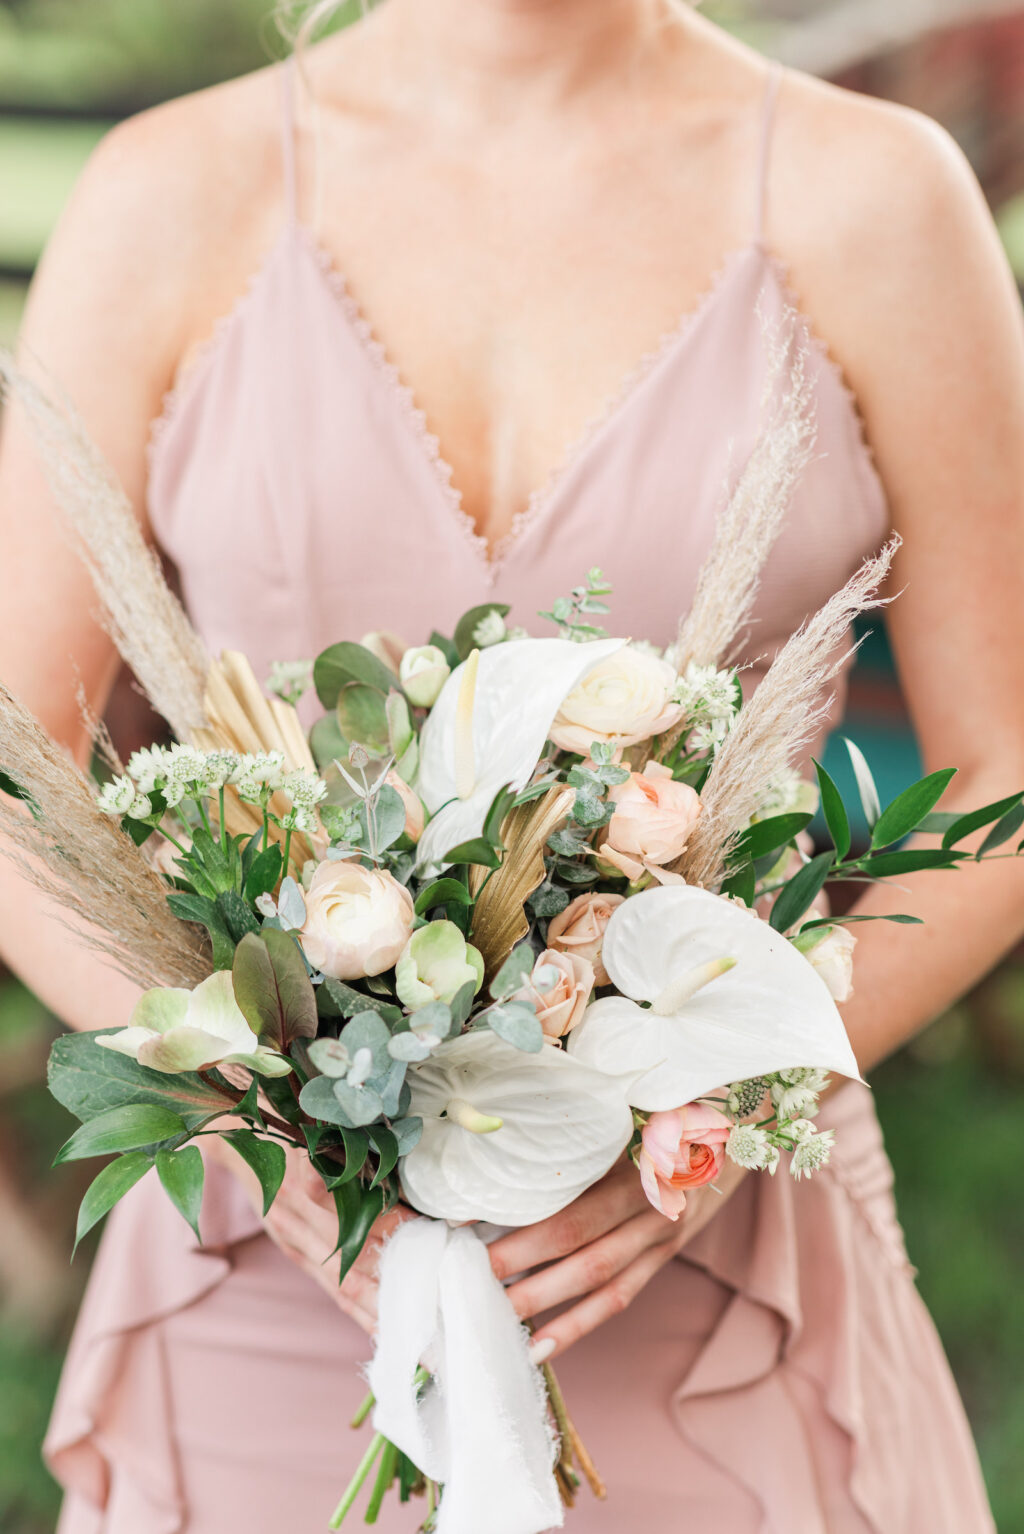 Boho Bridesmaid with Flower Crown Wearing Pink Mauve Ruffle Dress Holding White Calla Lillies, Pampas Grass, Greenery Wild Floral Bouquet | Big Fake Wedding Tampa